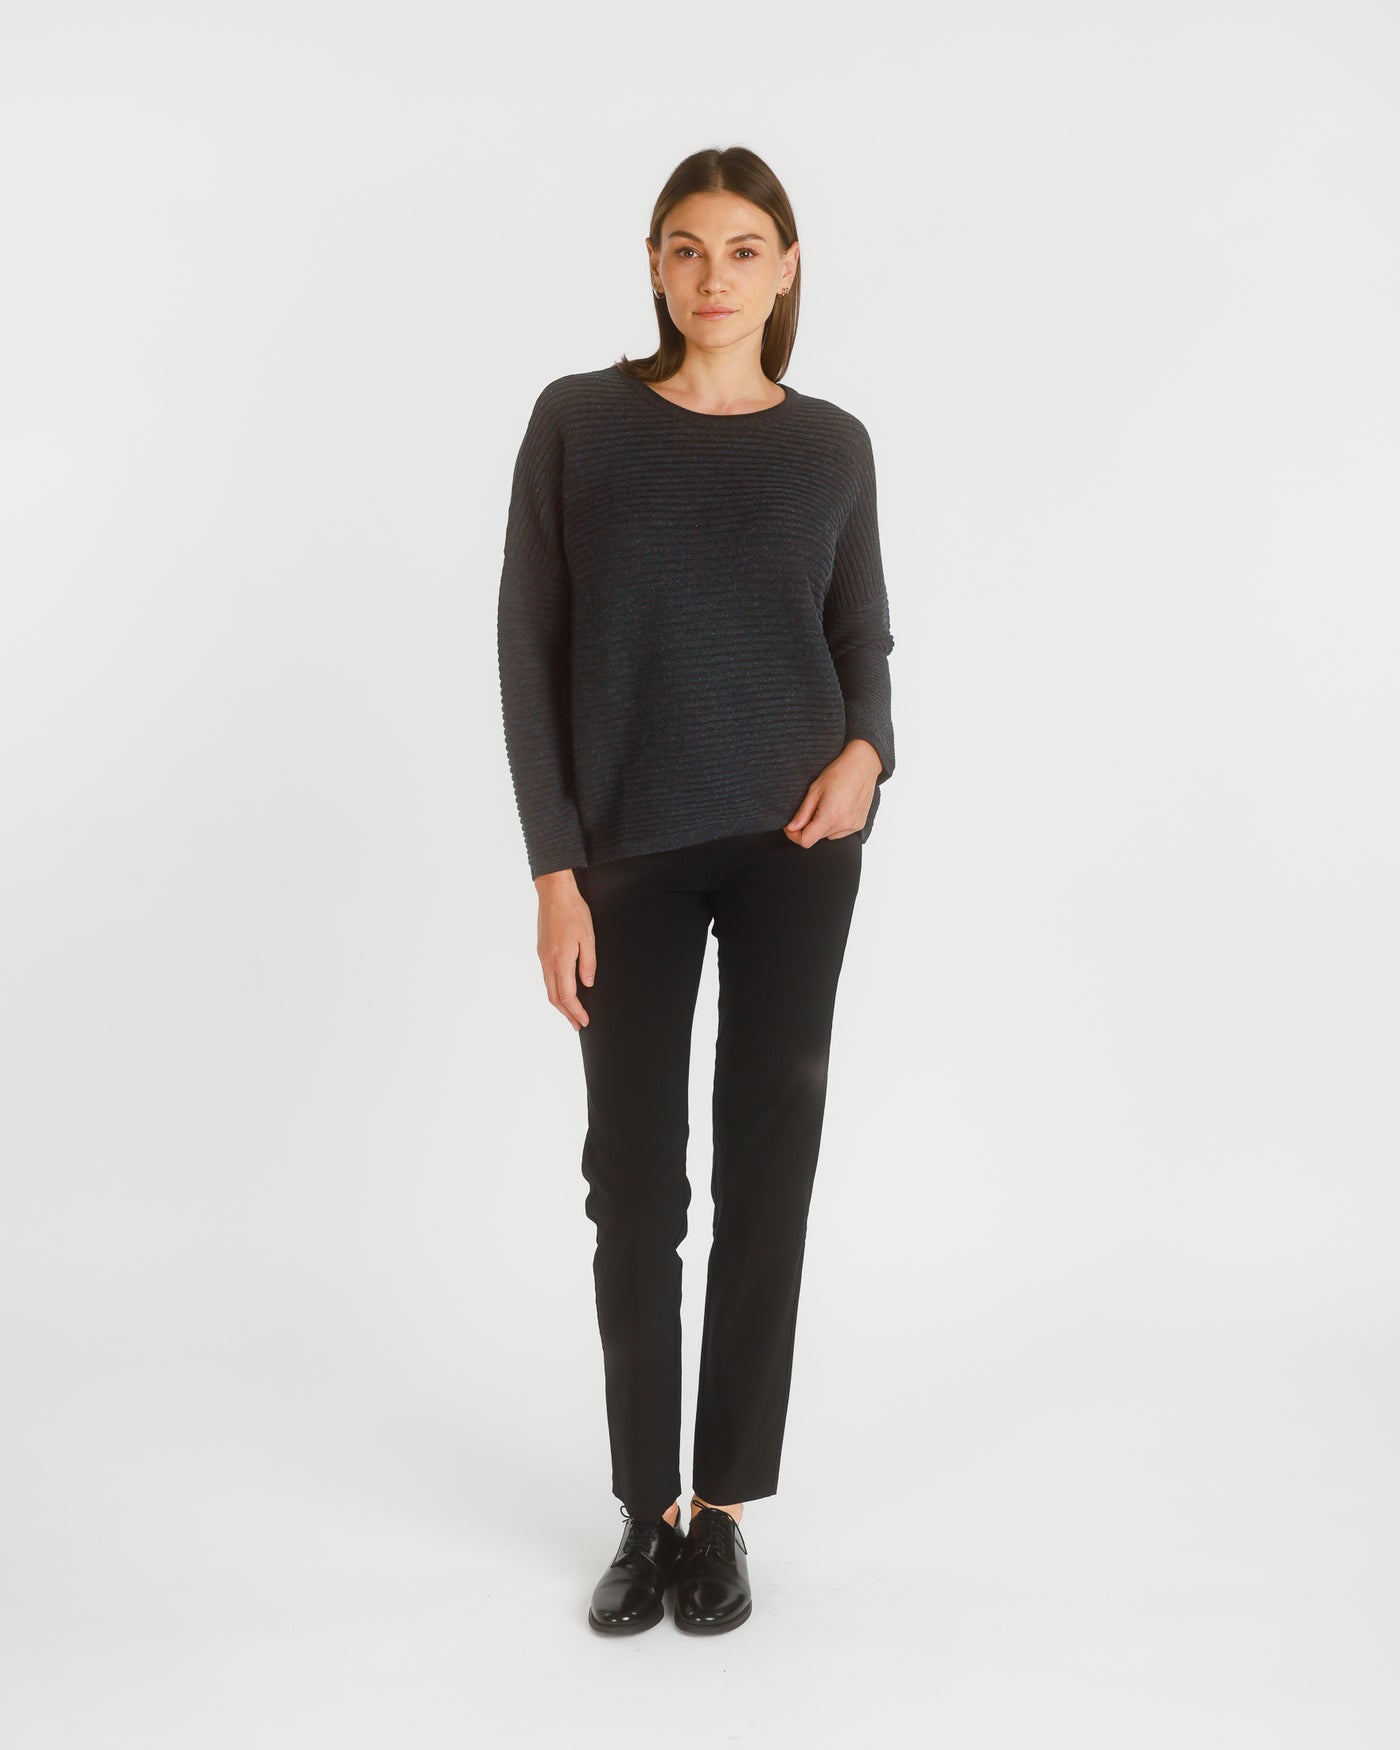 Muse Merino Ribbed Sweater. Charcoal. One Size